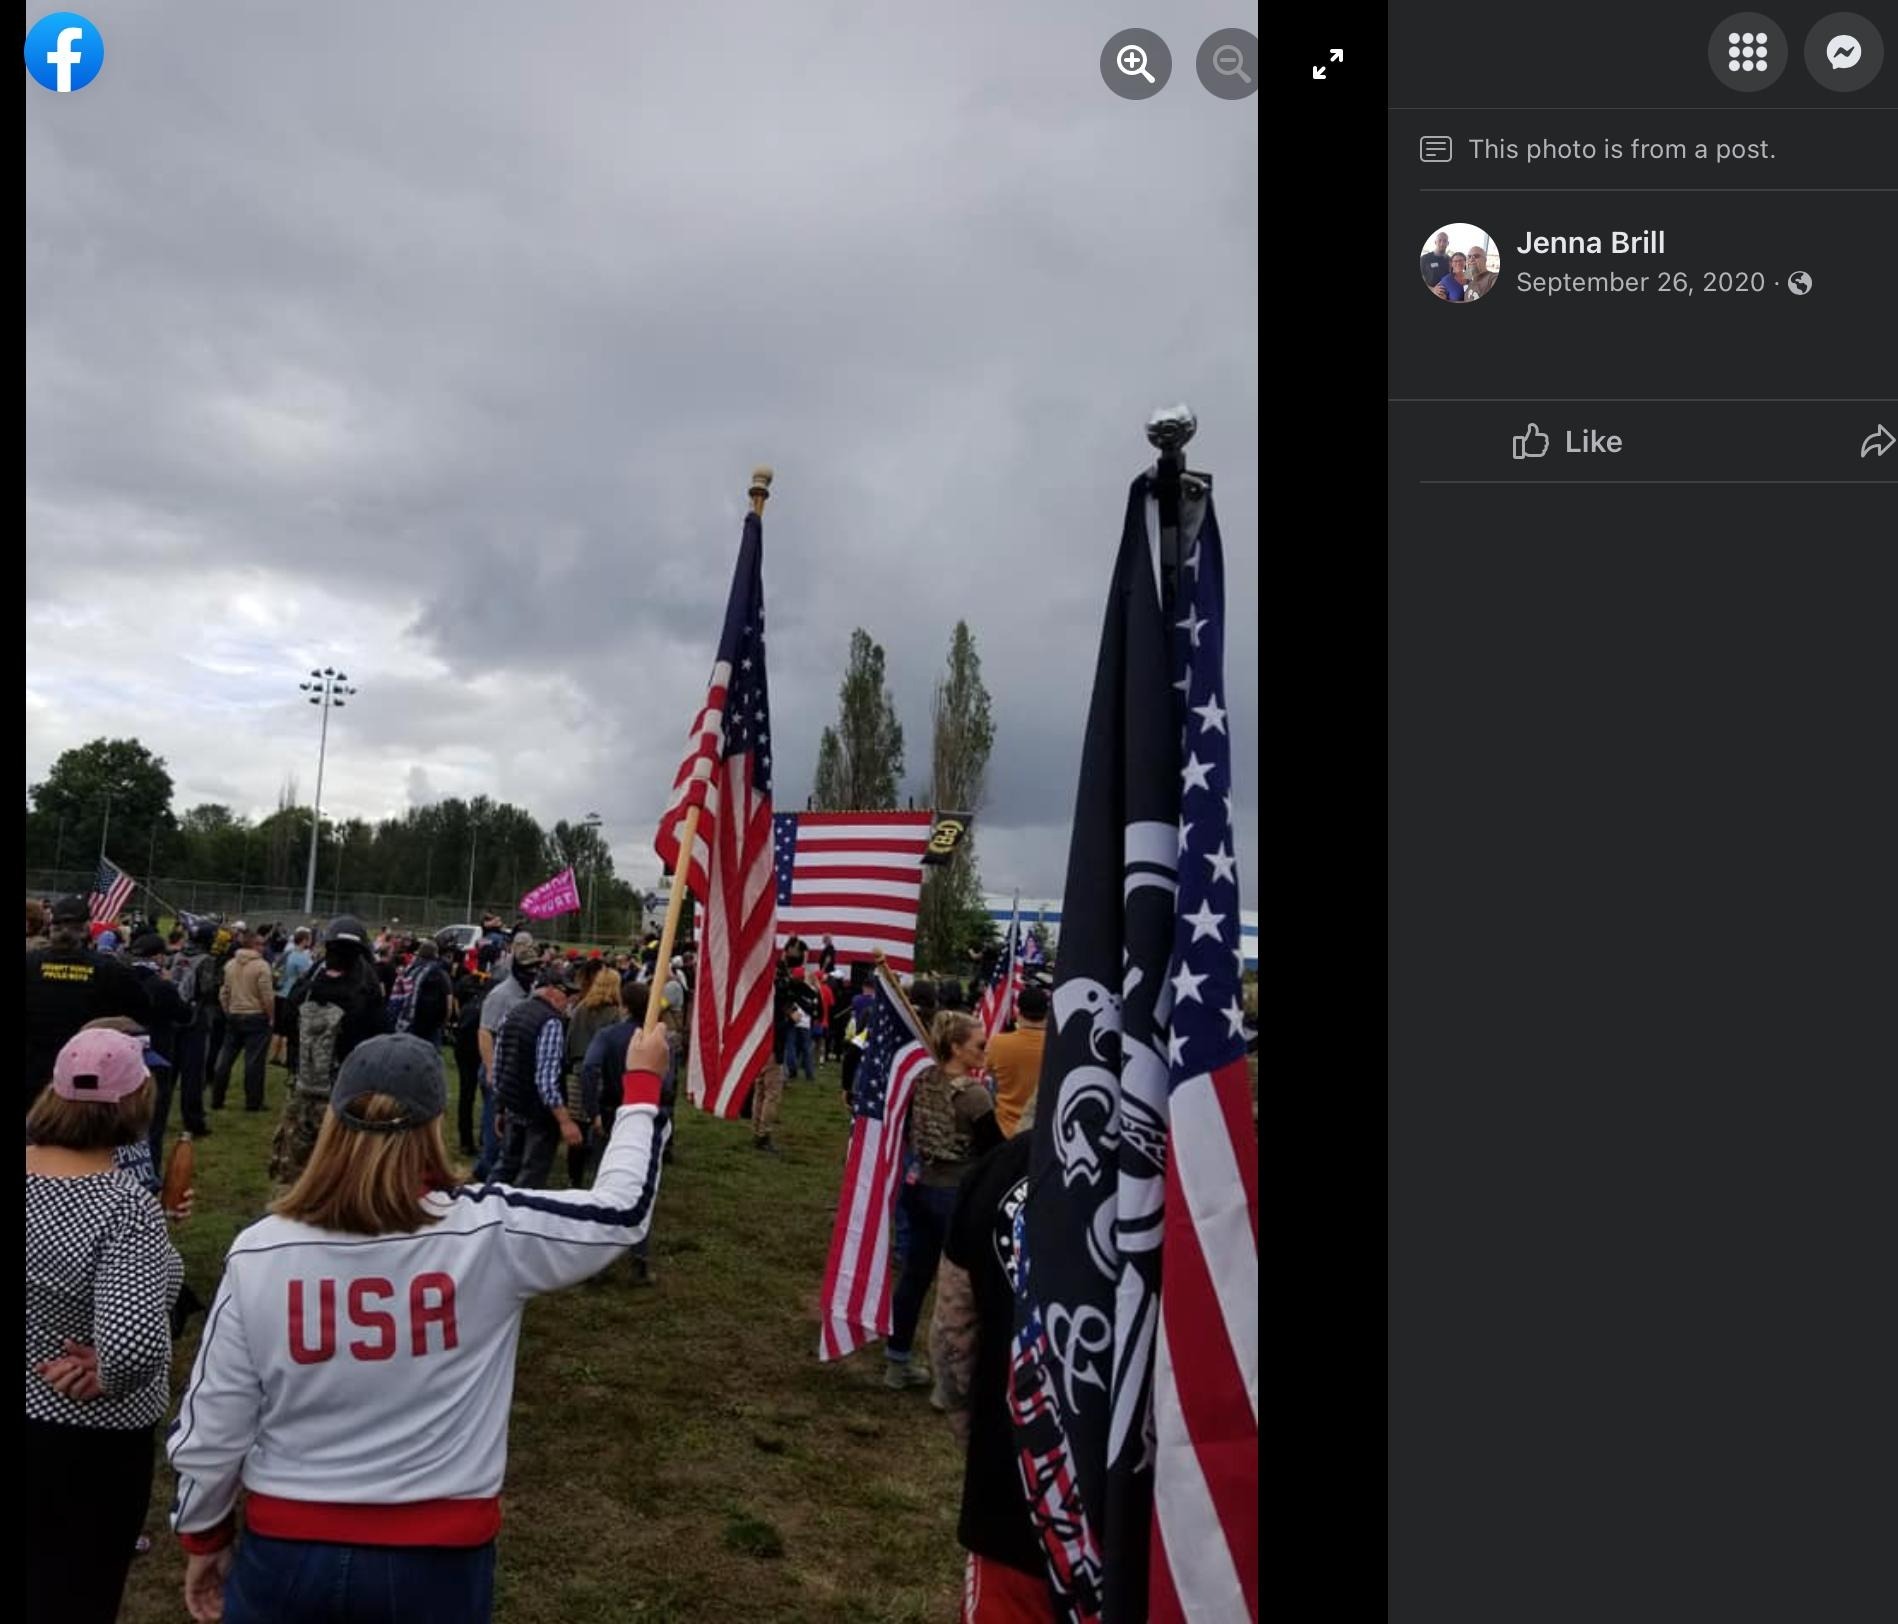 Picture posted on Jenna Brill's Facebook account from the September 26, 2020 Proud Boys event at Delta Park.